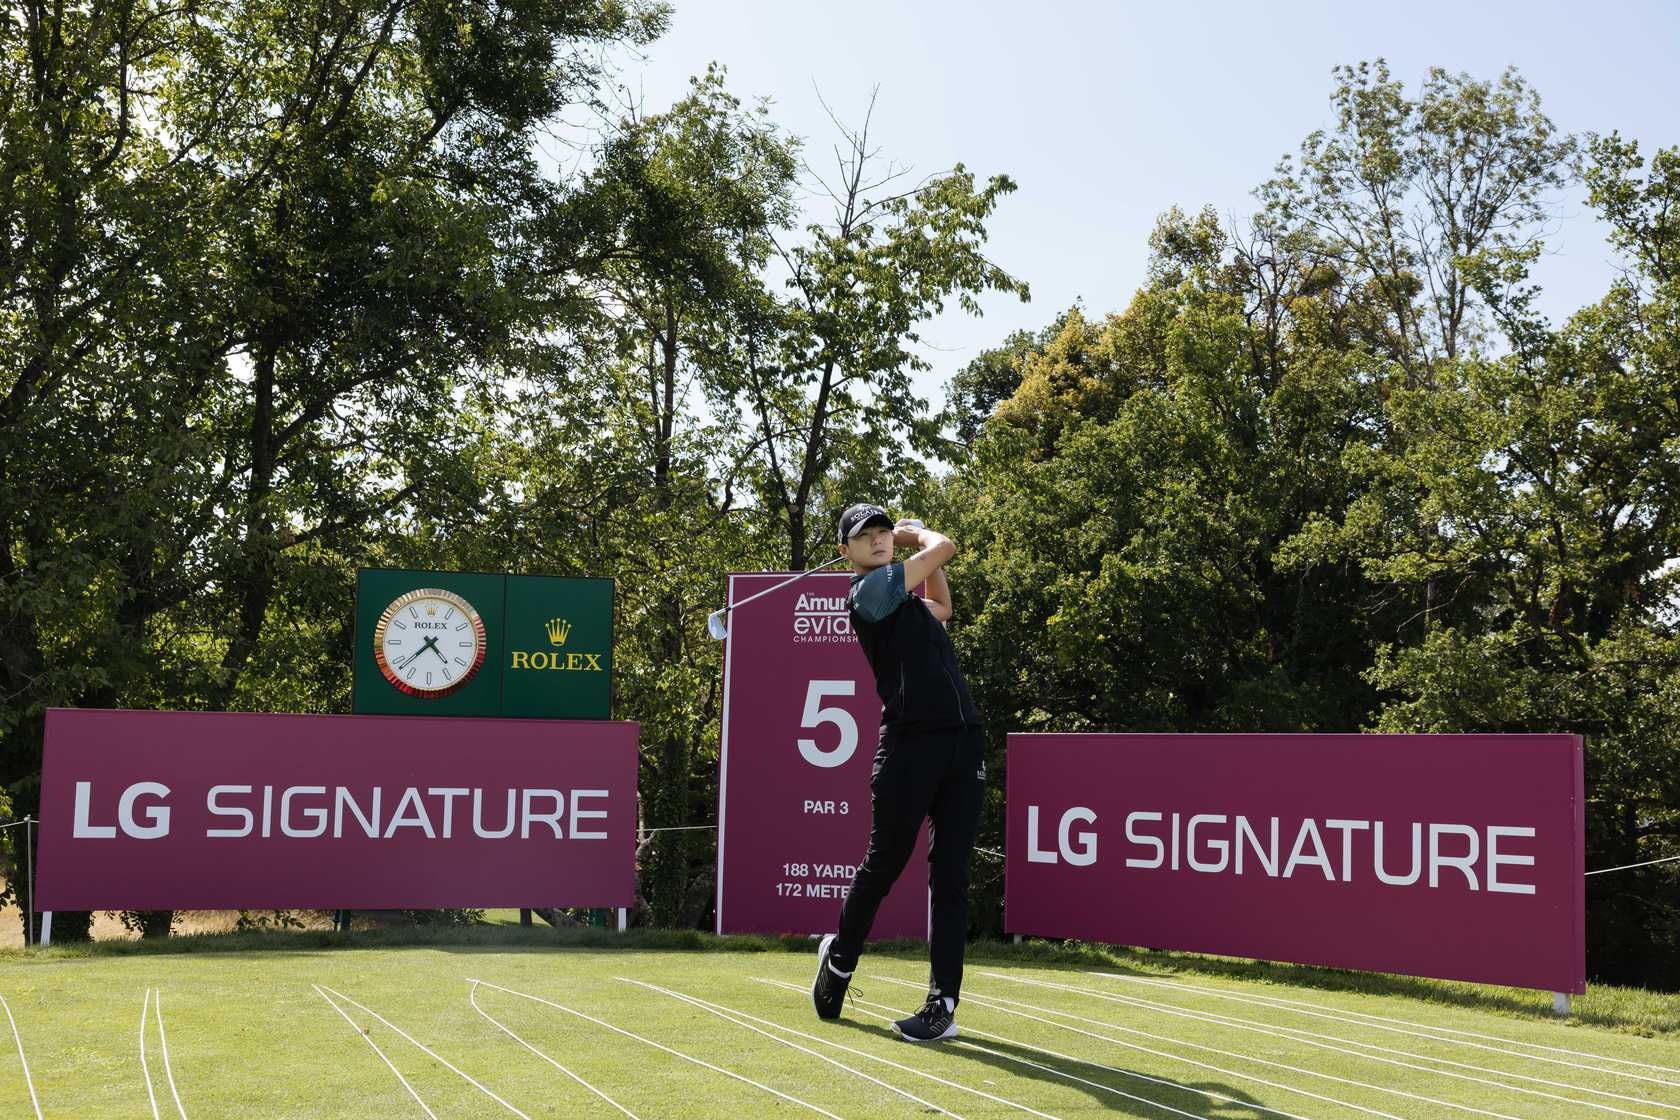 Golfer Park Sung-hyun teeing off in front of LG SIGNATURE signage at the Amundi Evian Championship